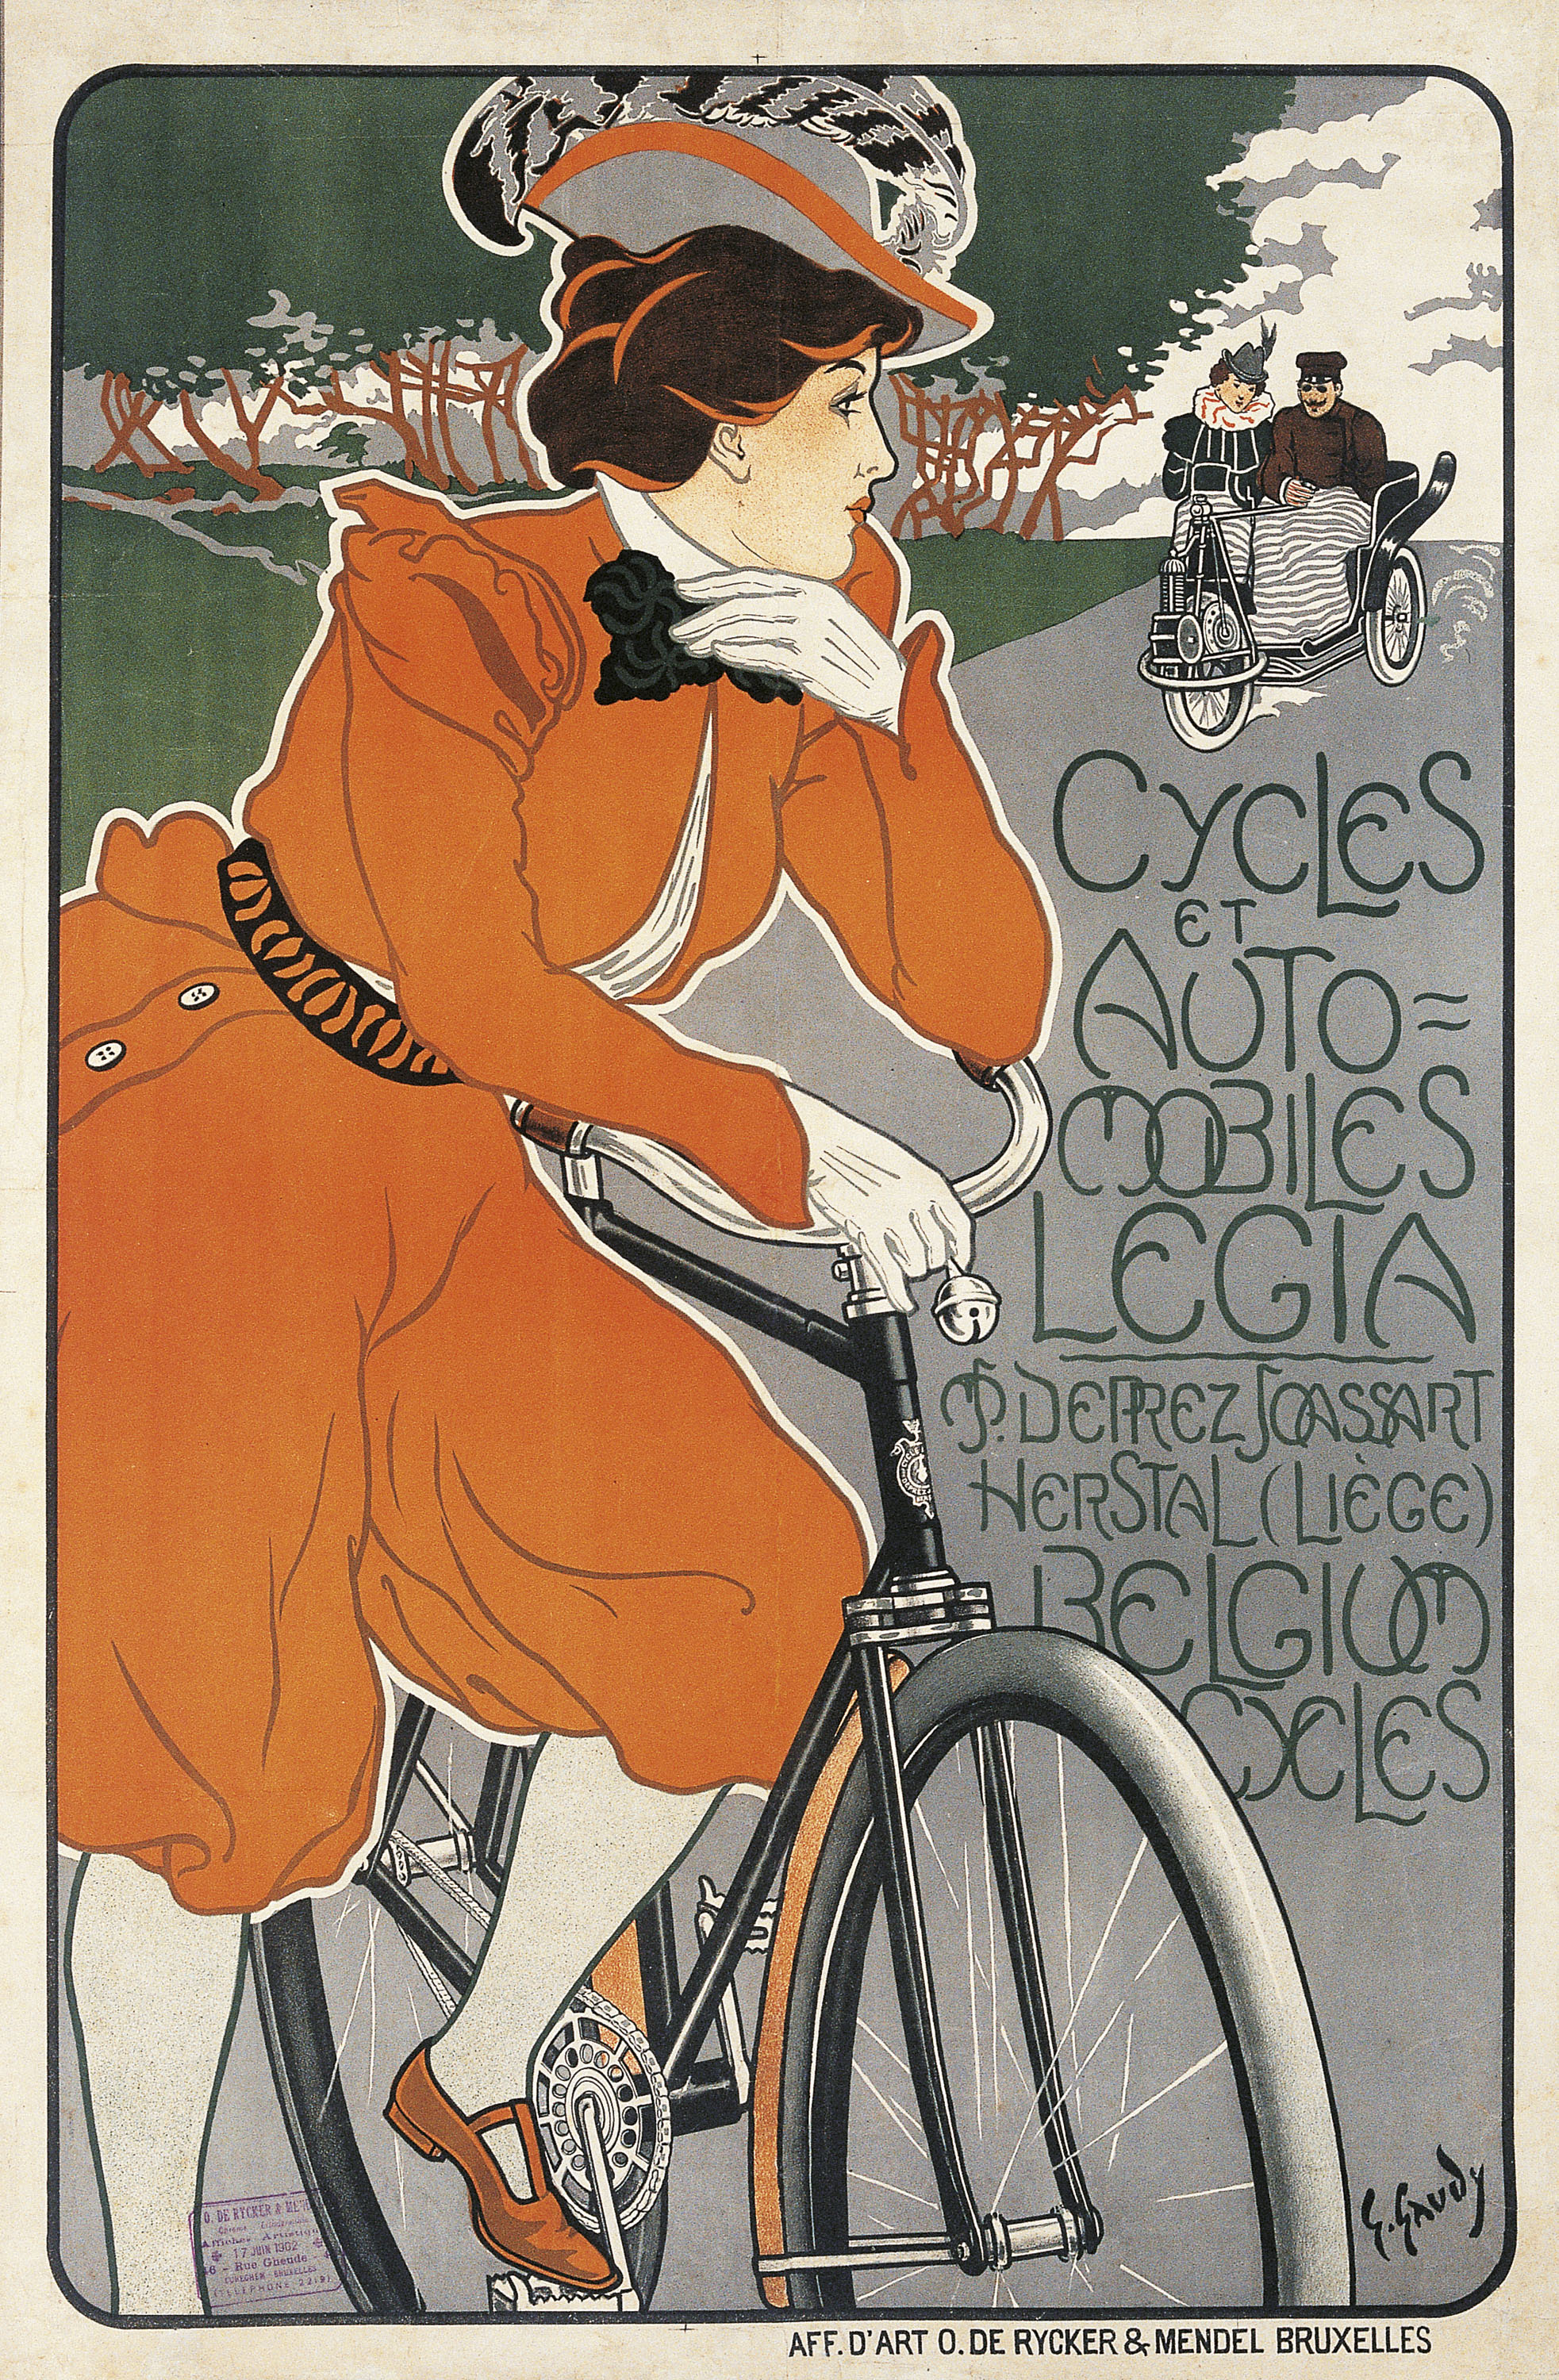 Plakat für Legia Cycles and Automobiles by Georges Gaudy - 1898 - 95,2 x 64,2 cm Europeana Foundation